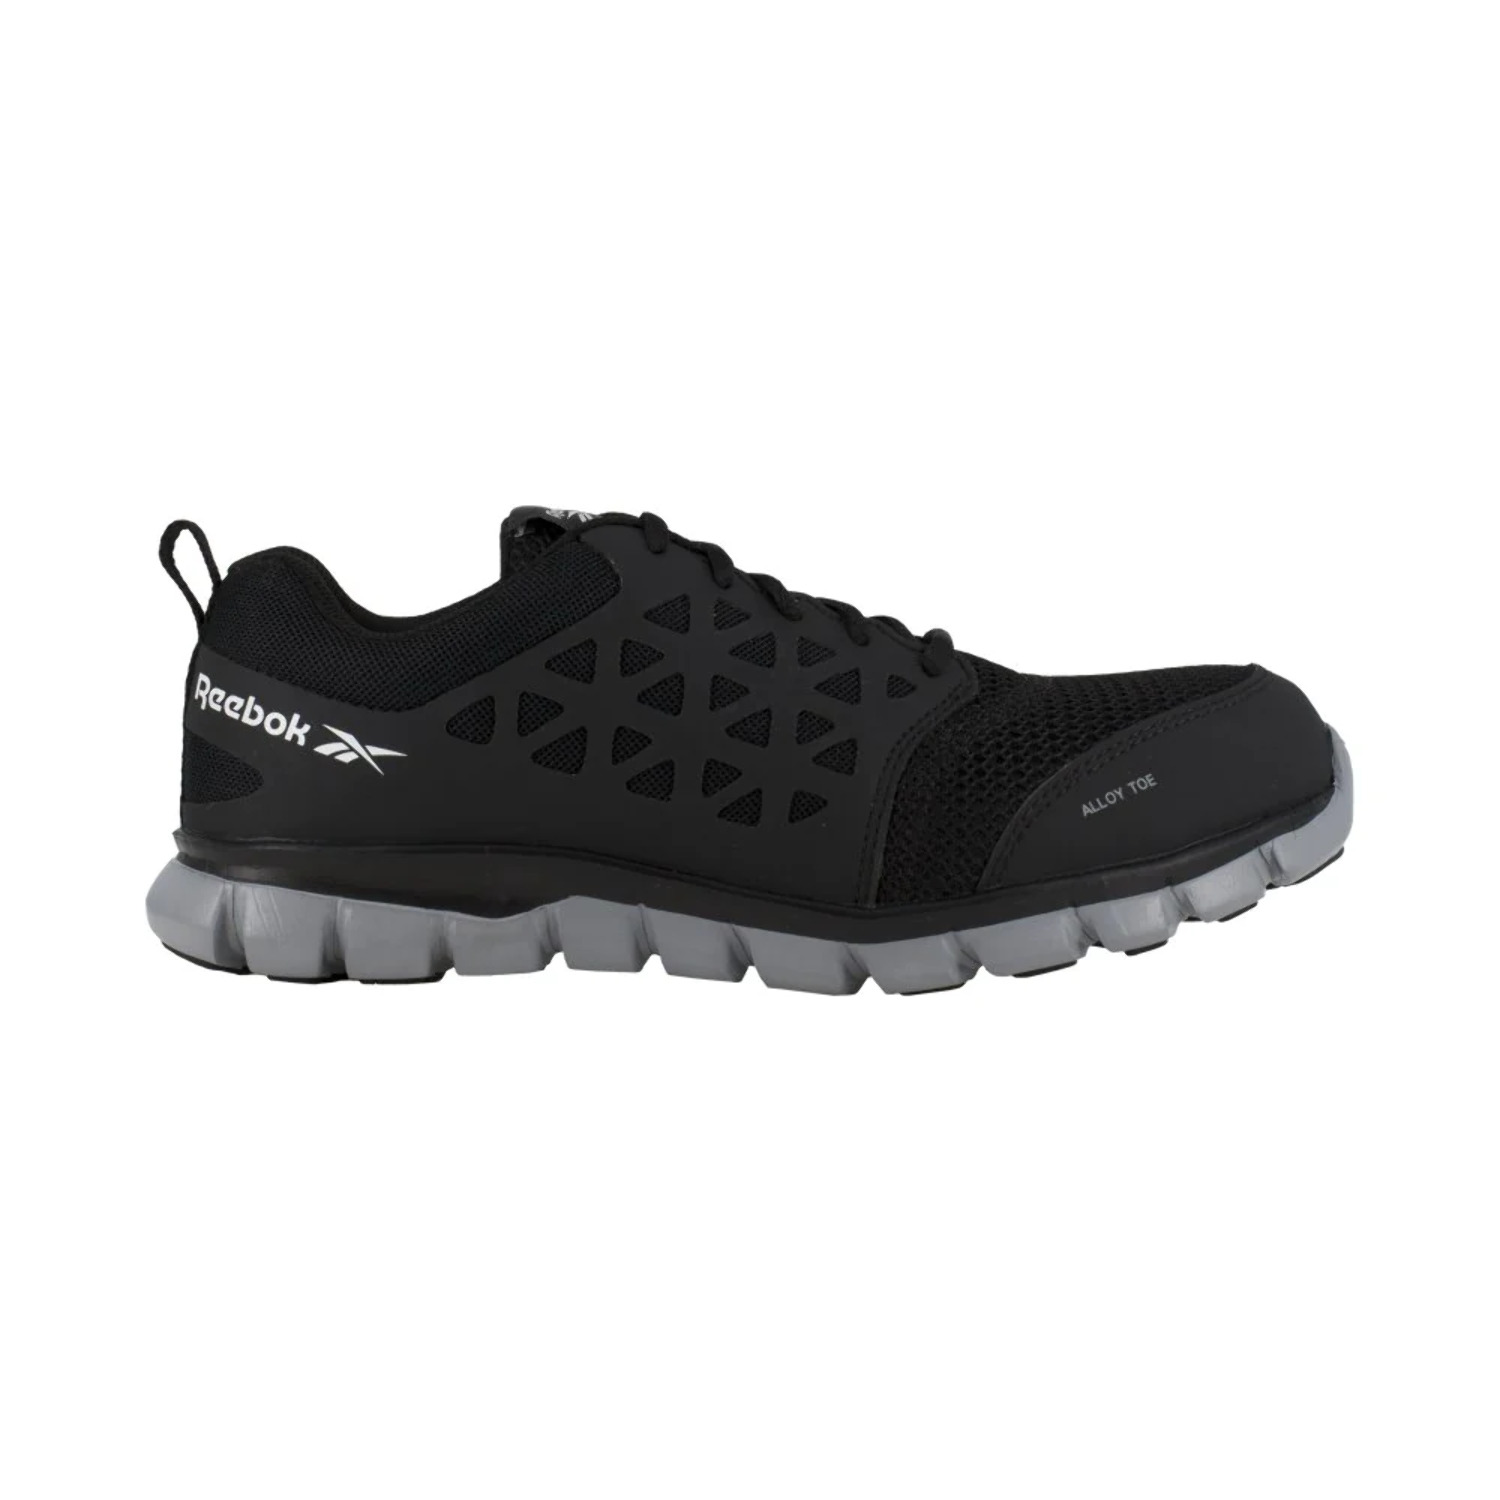 Reebok Work  Mens Sublite Cushion Electrical Alloy Toe   Work Safety Shoes Casual - image 3 of 5